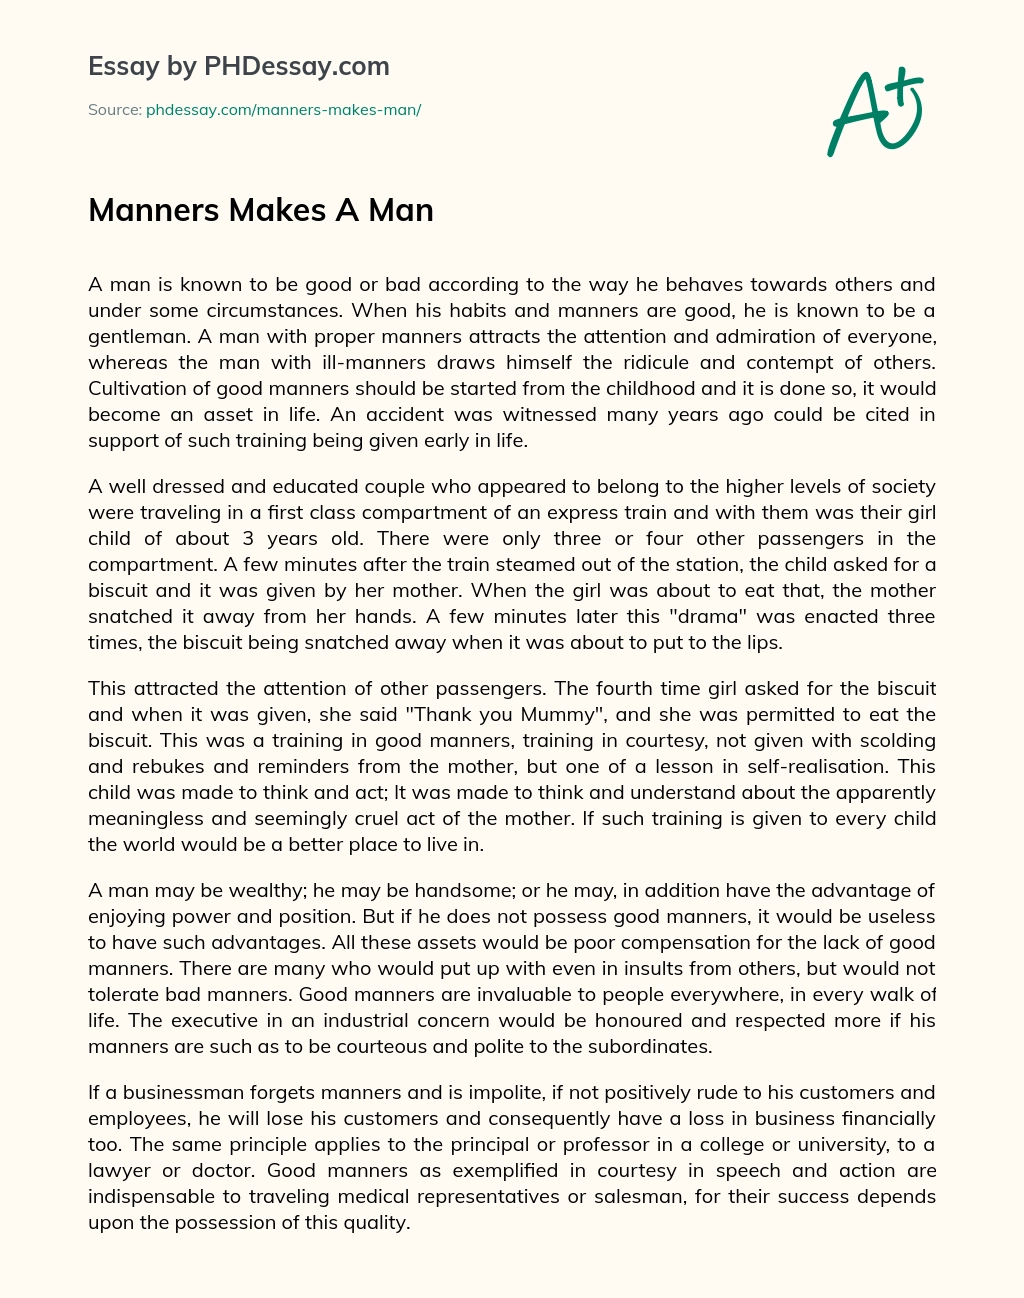 Manners Makes A Man essay